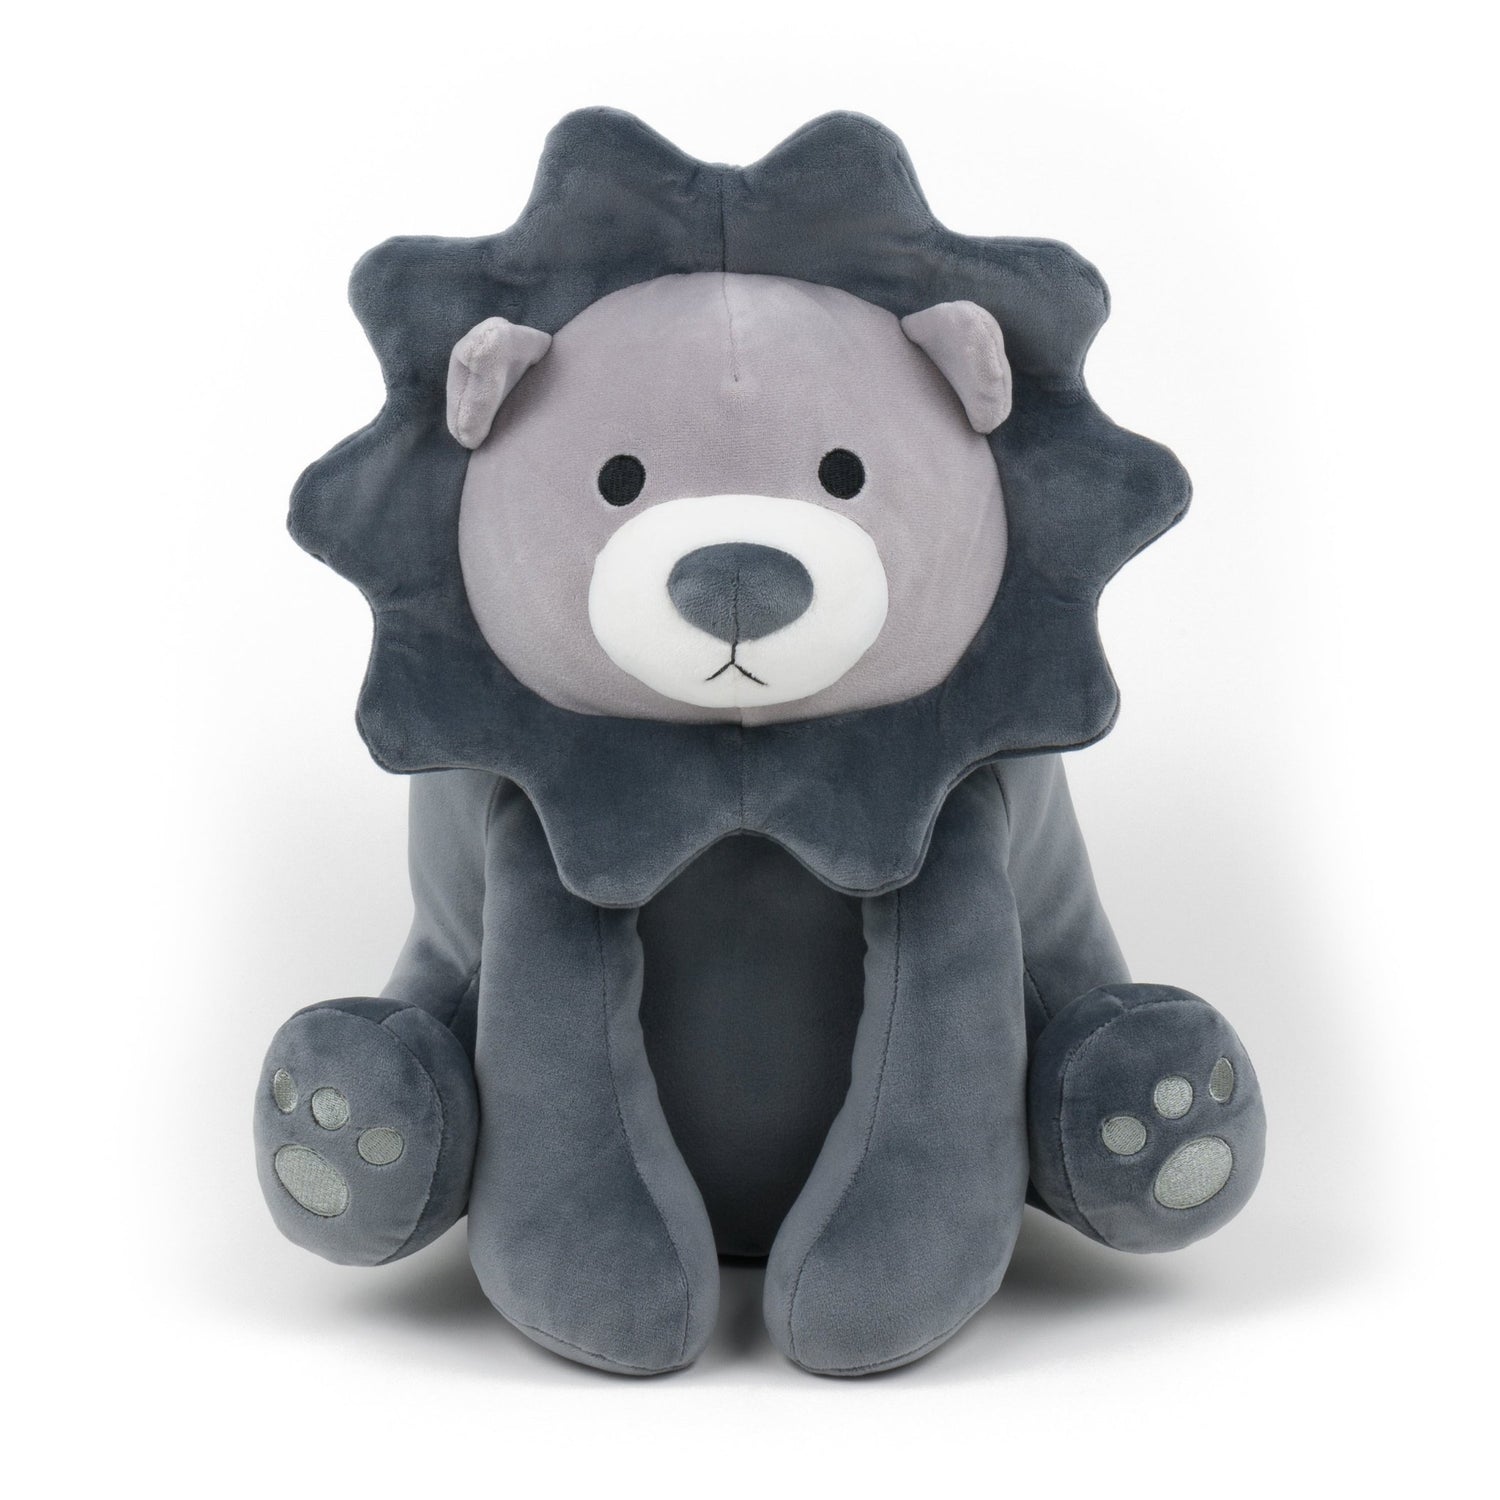 Lion Plush Toy / Bear Dressed as a Lion Toy - Snuggie Buggies